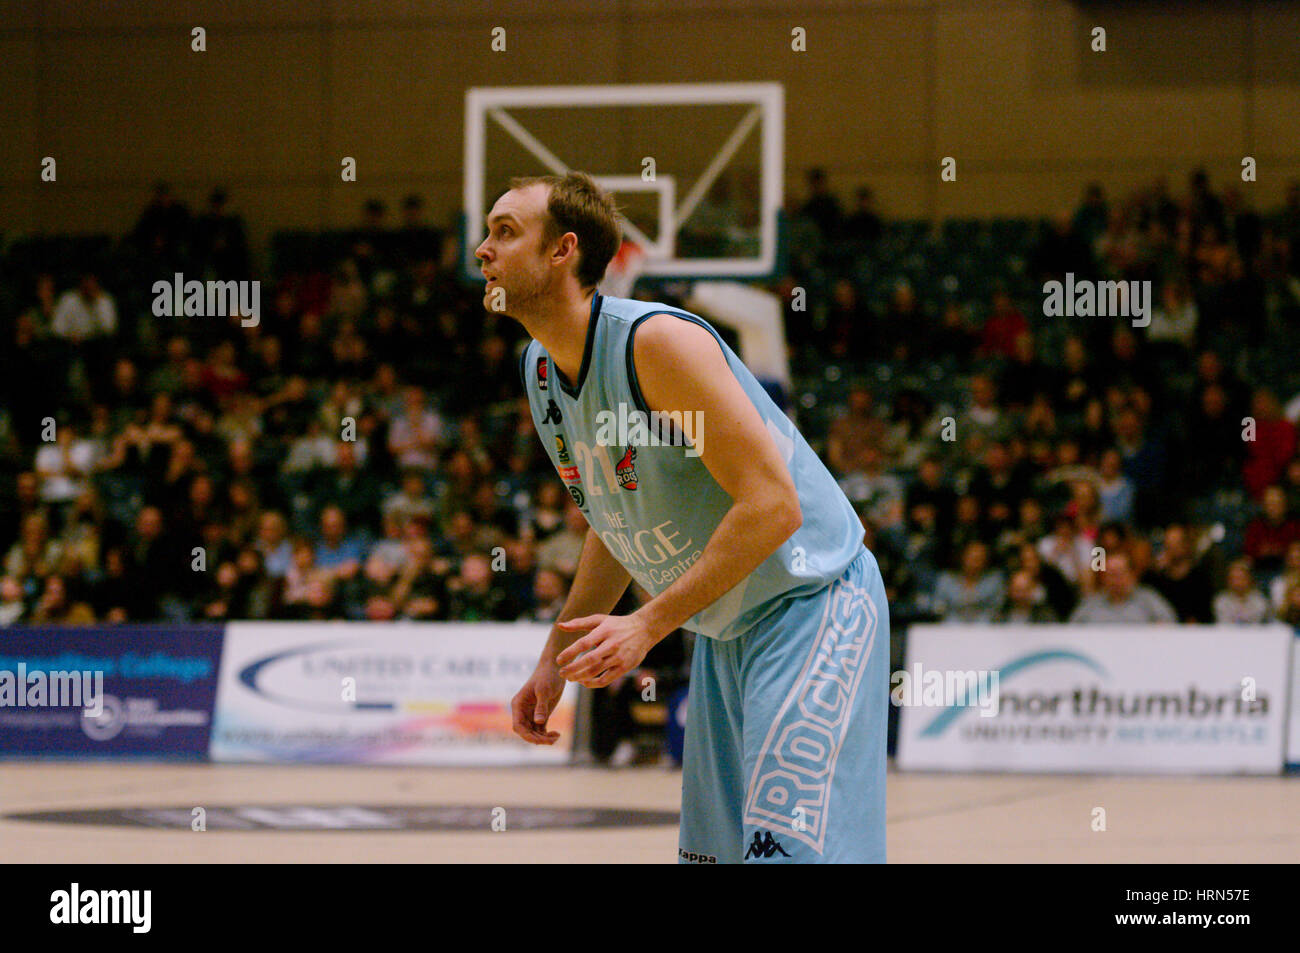 Newcastle upon Tyne,England, 3rd March 2017. Lewis Thomas of Glasgow Rocks watching for a pass during their match against Esh Group Eagles Newcastle in the British Basketball League match at Sport Central. Credit: Colin Edwards/Alamy Live News Stock Photo